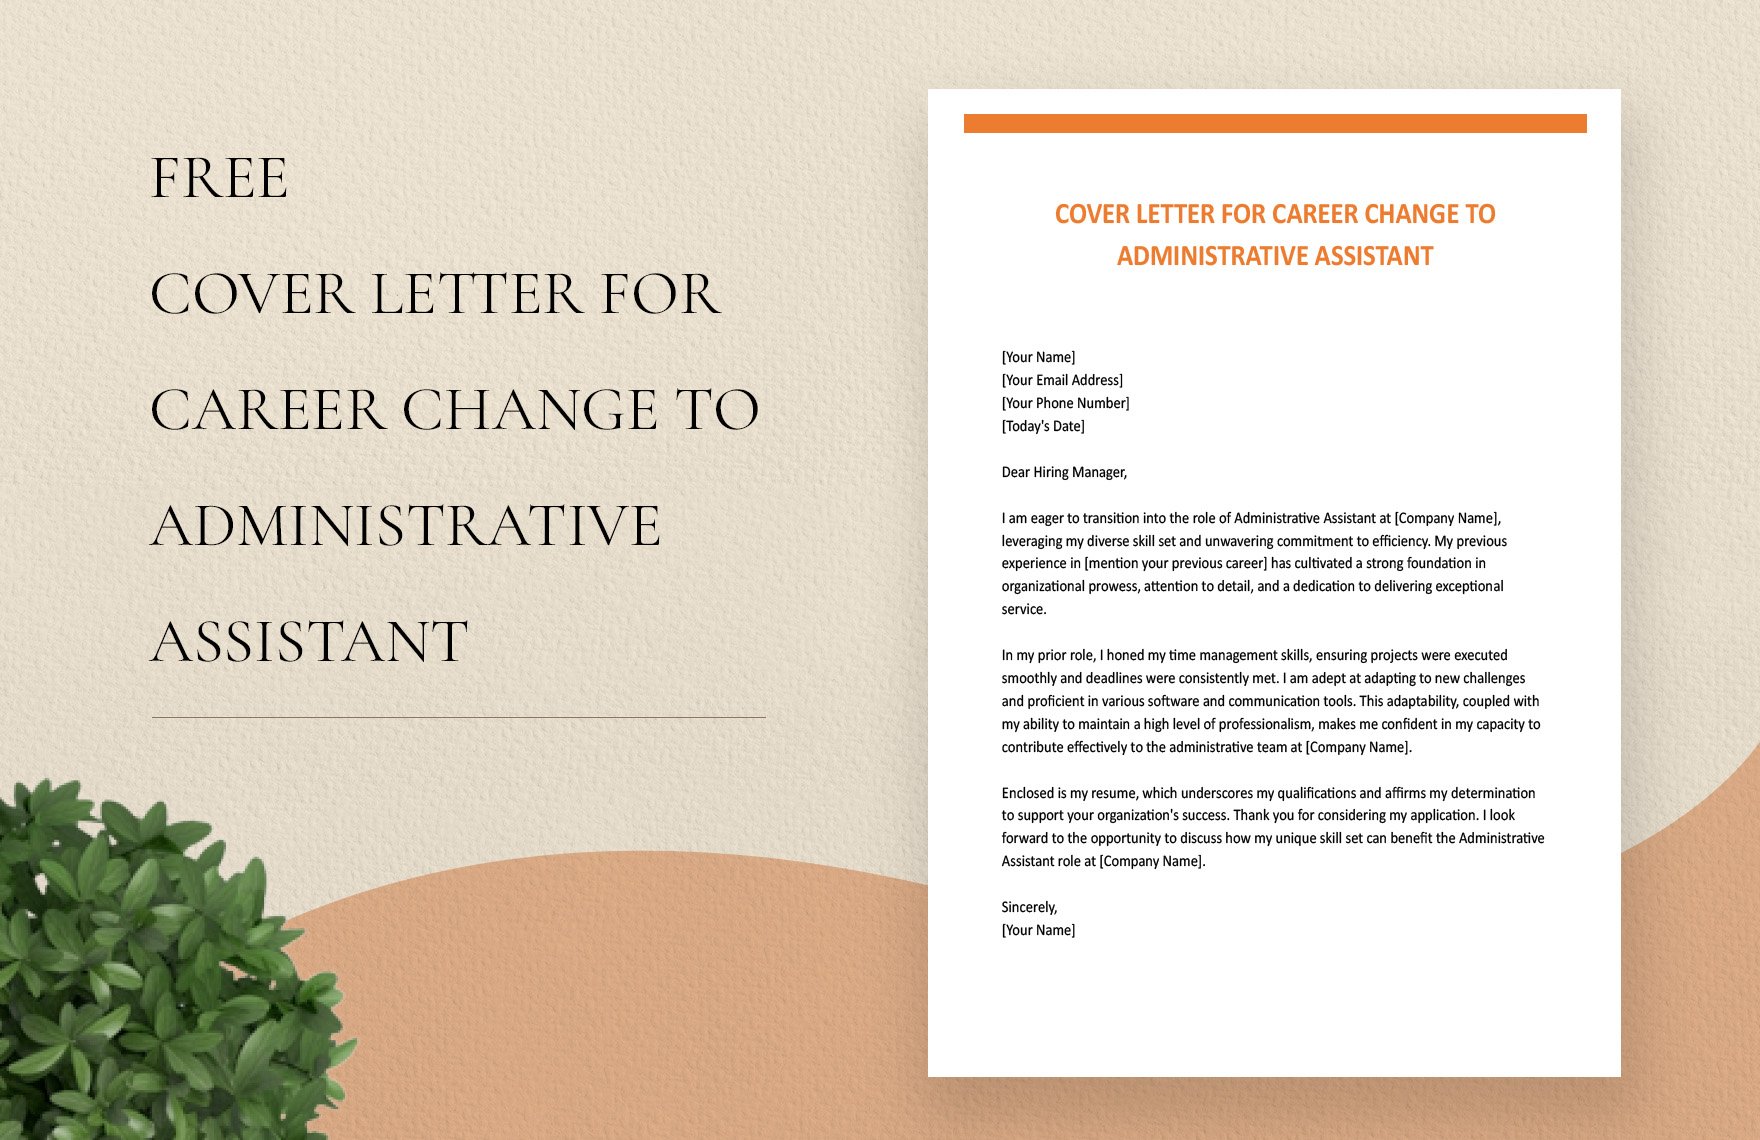 Cover Letter For Career Change To Administrative Assistant